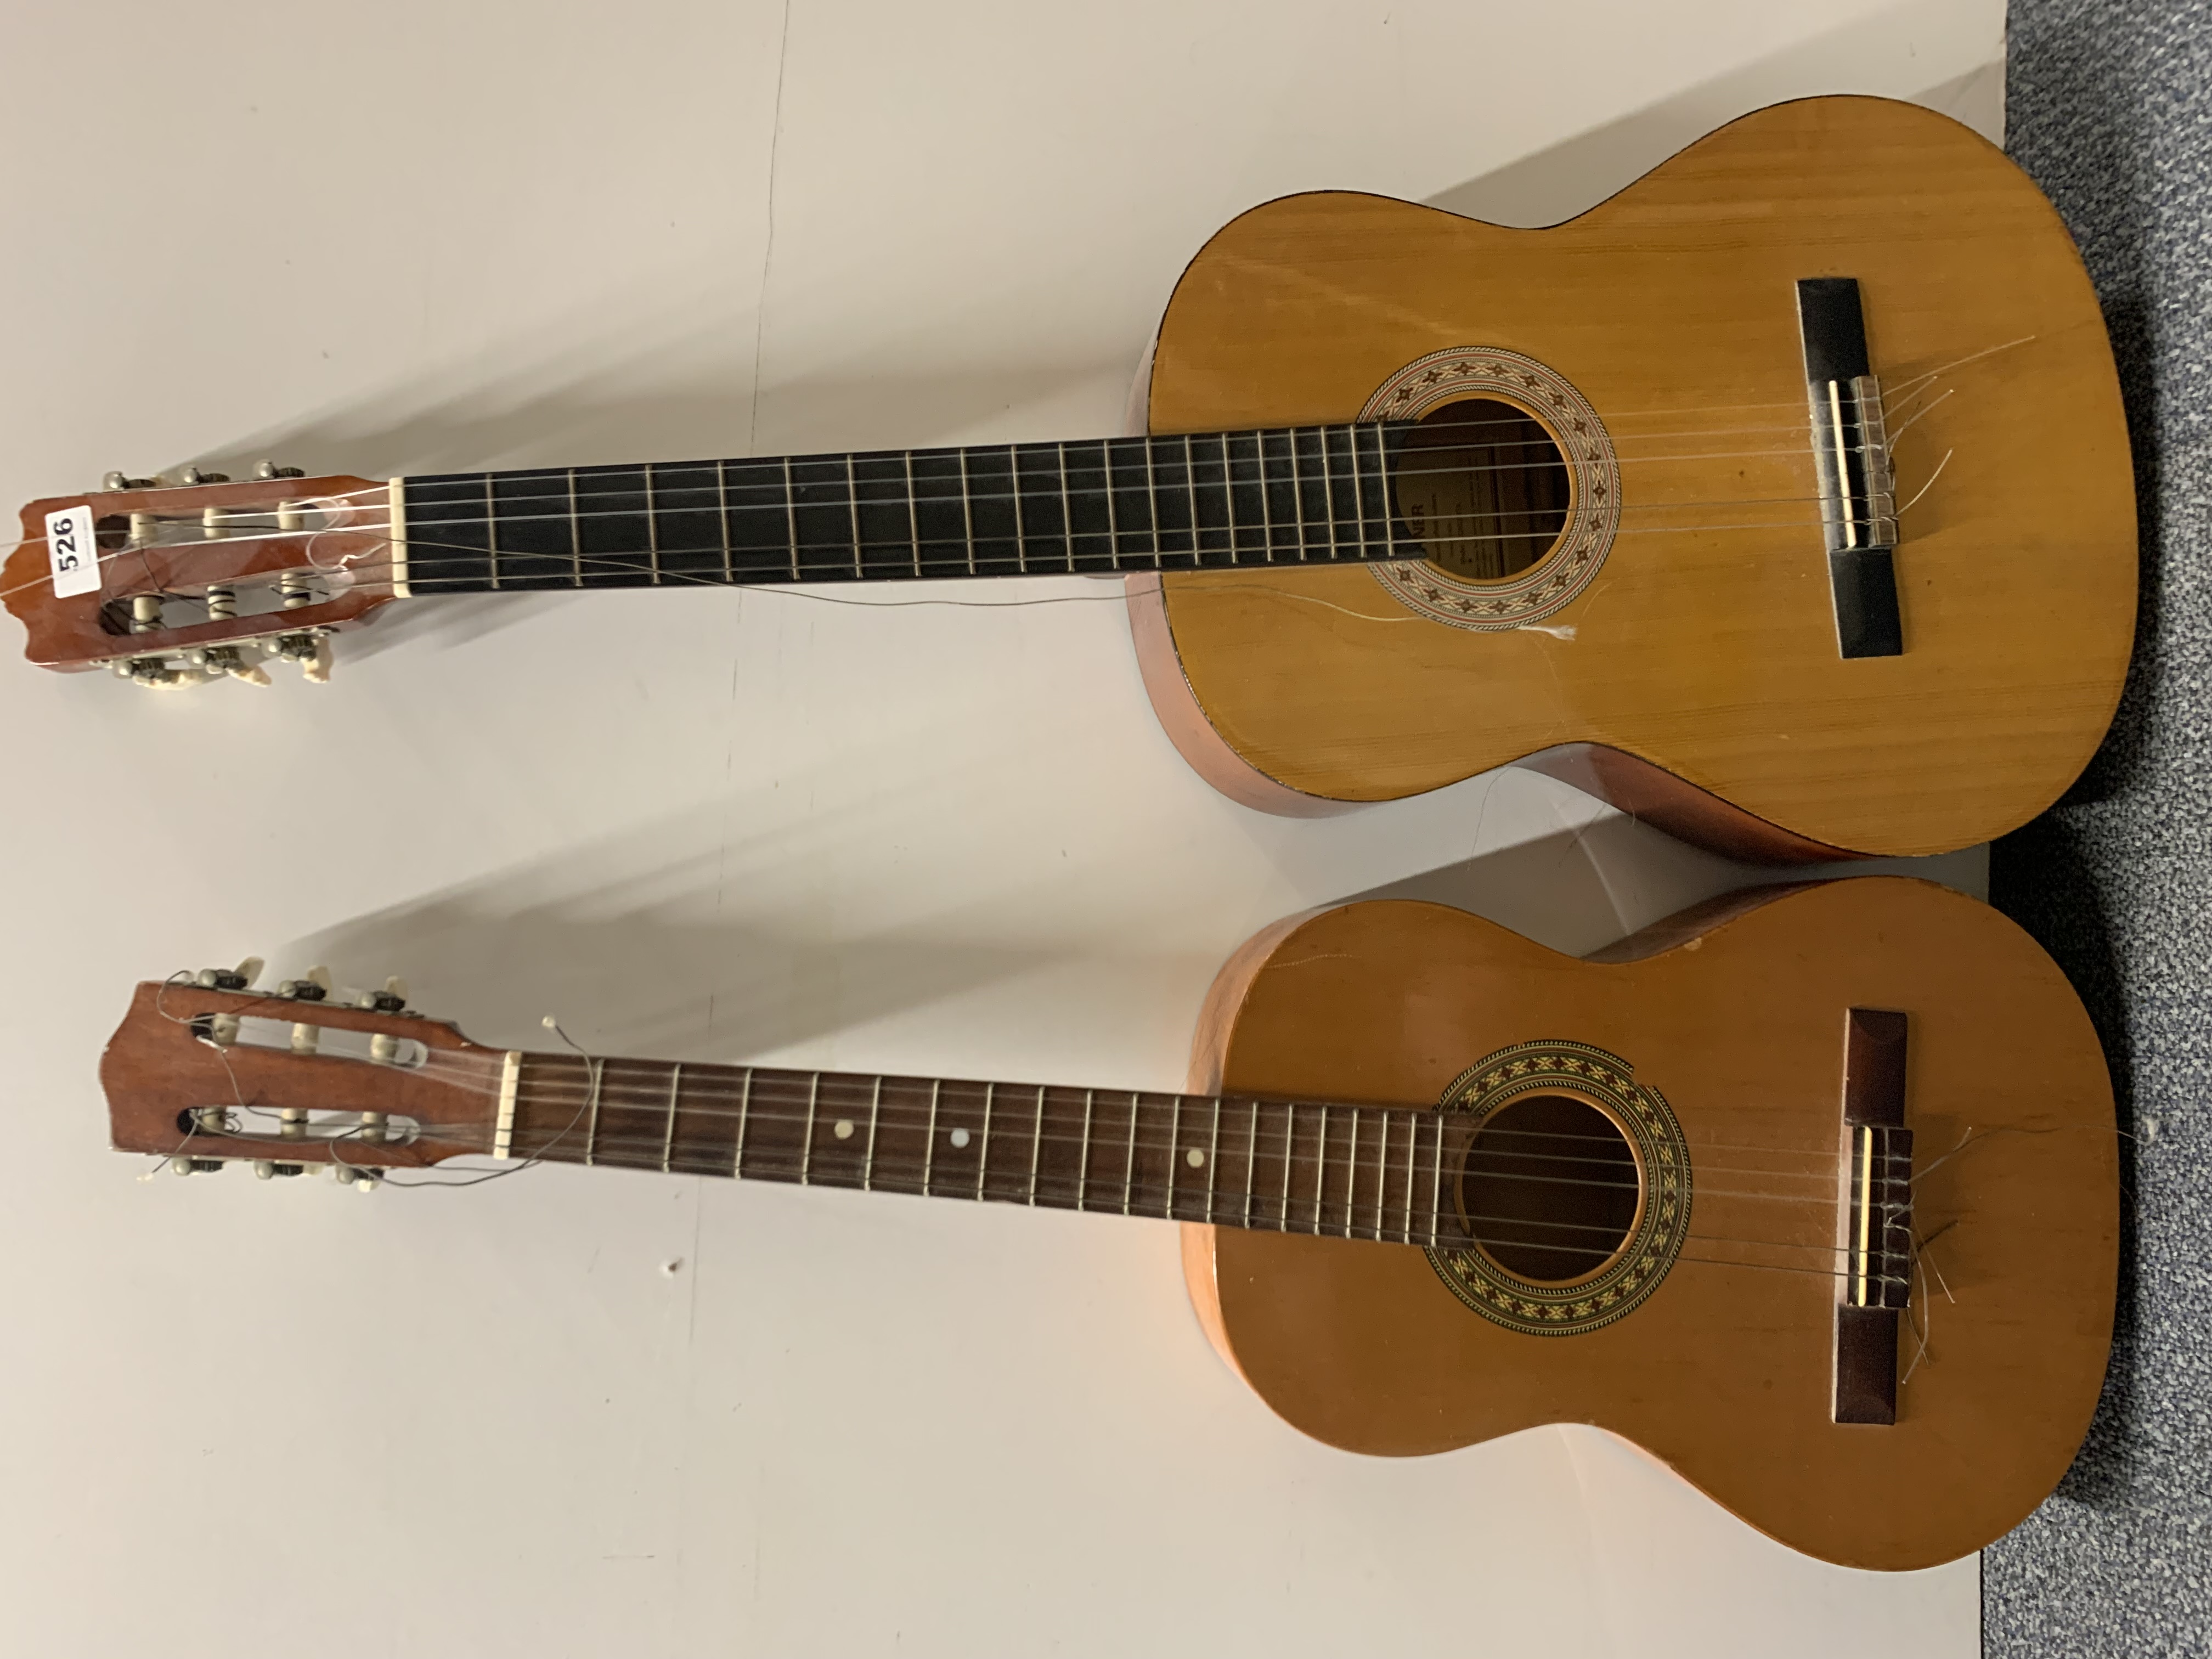 An acoustic guitar and a half size guitar.